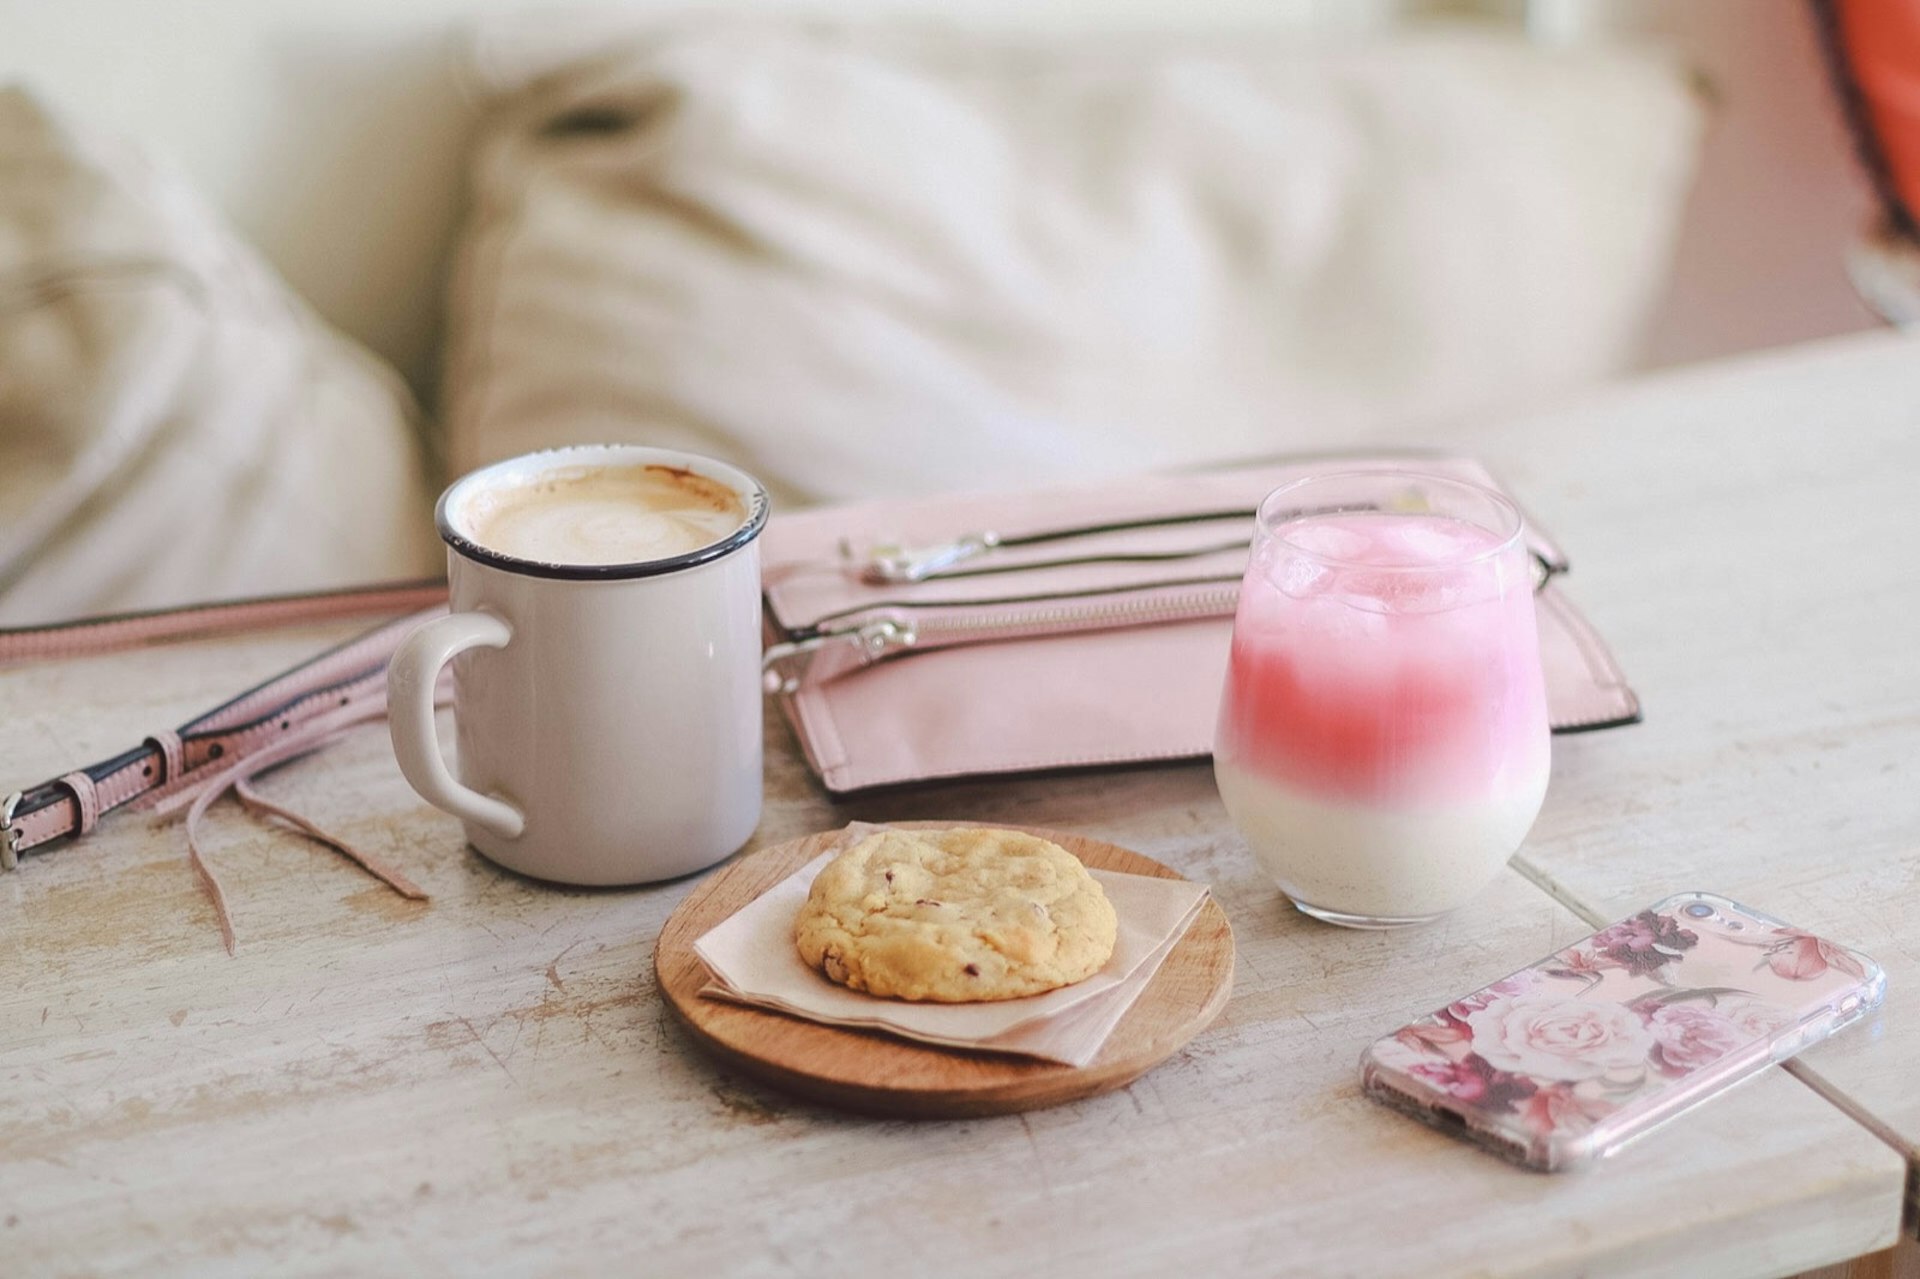 A pale pink drink and a cookie on a plate are seen on a white table © Jessica Lam / Lonely Planet